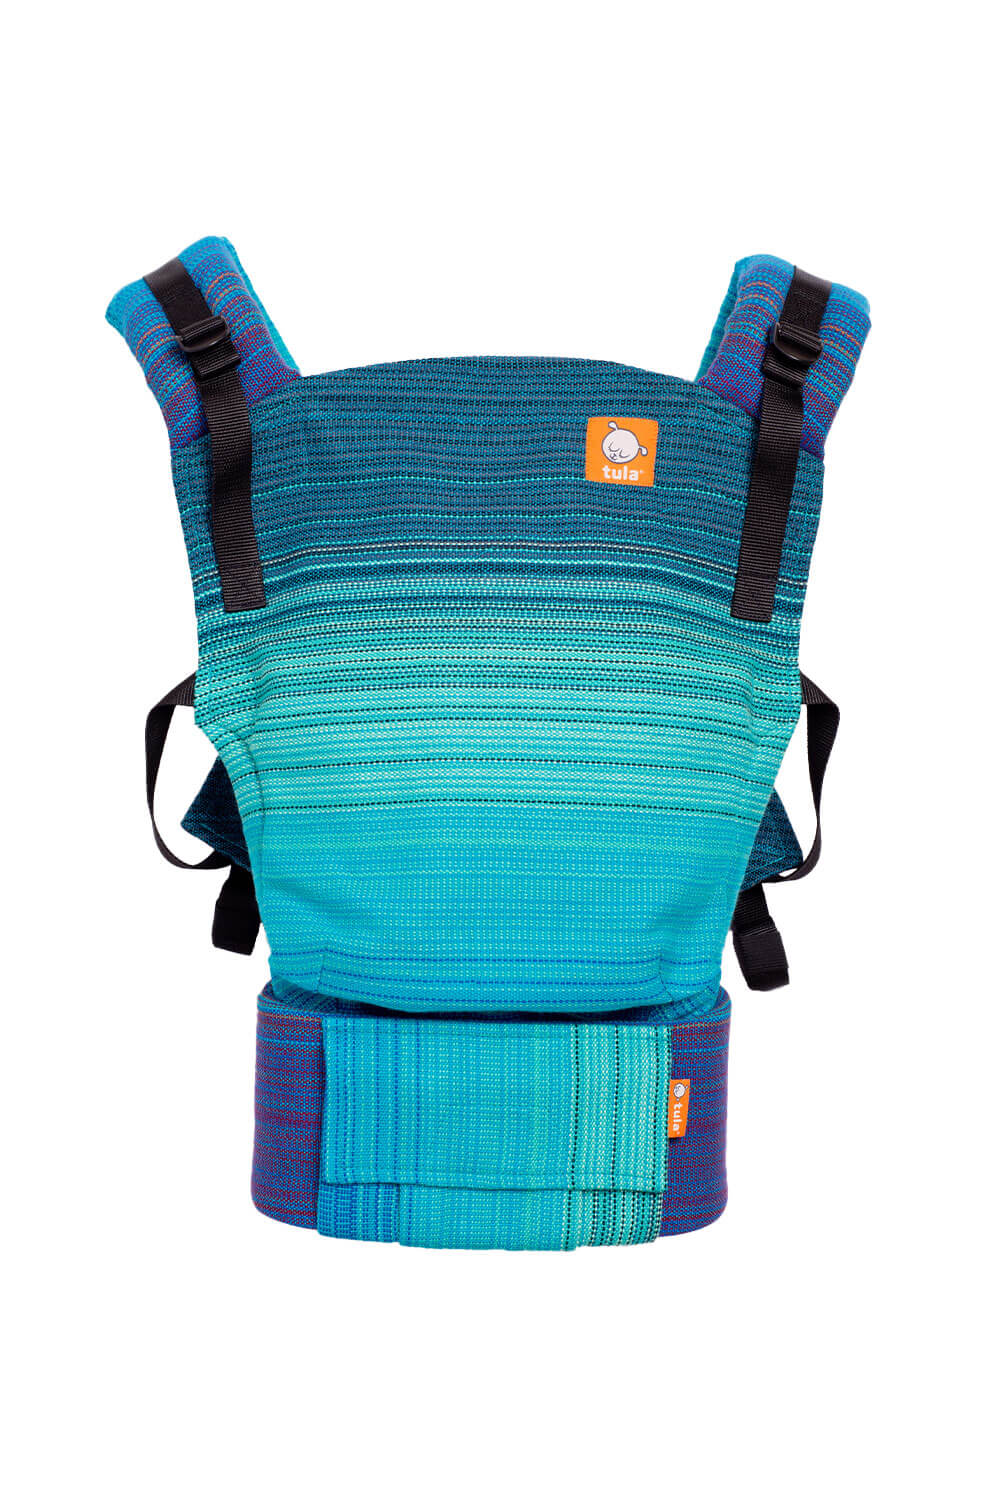 Good Things on the Horizon - Signature Handwoven Free-to-Grow Baby Carrier